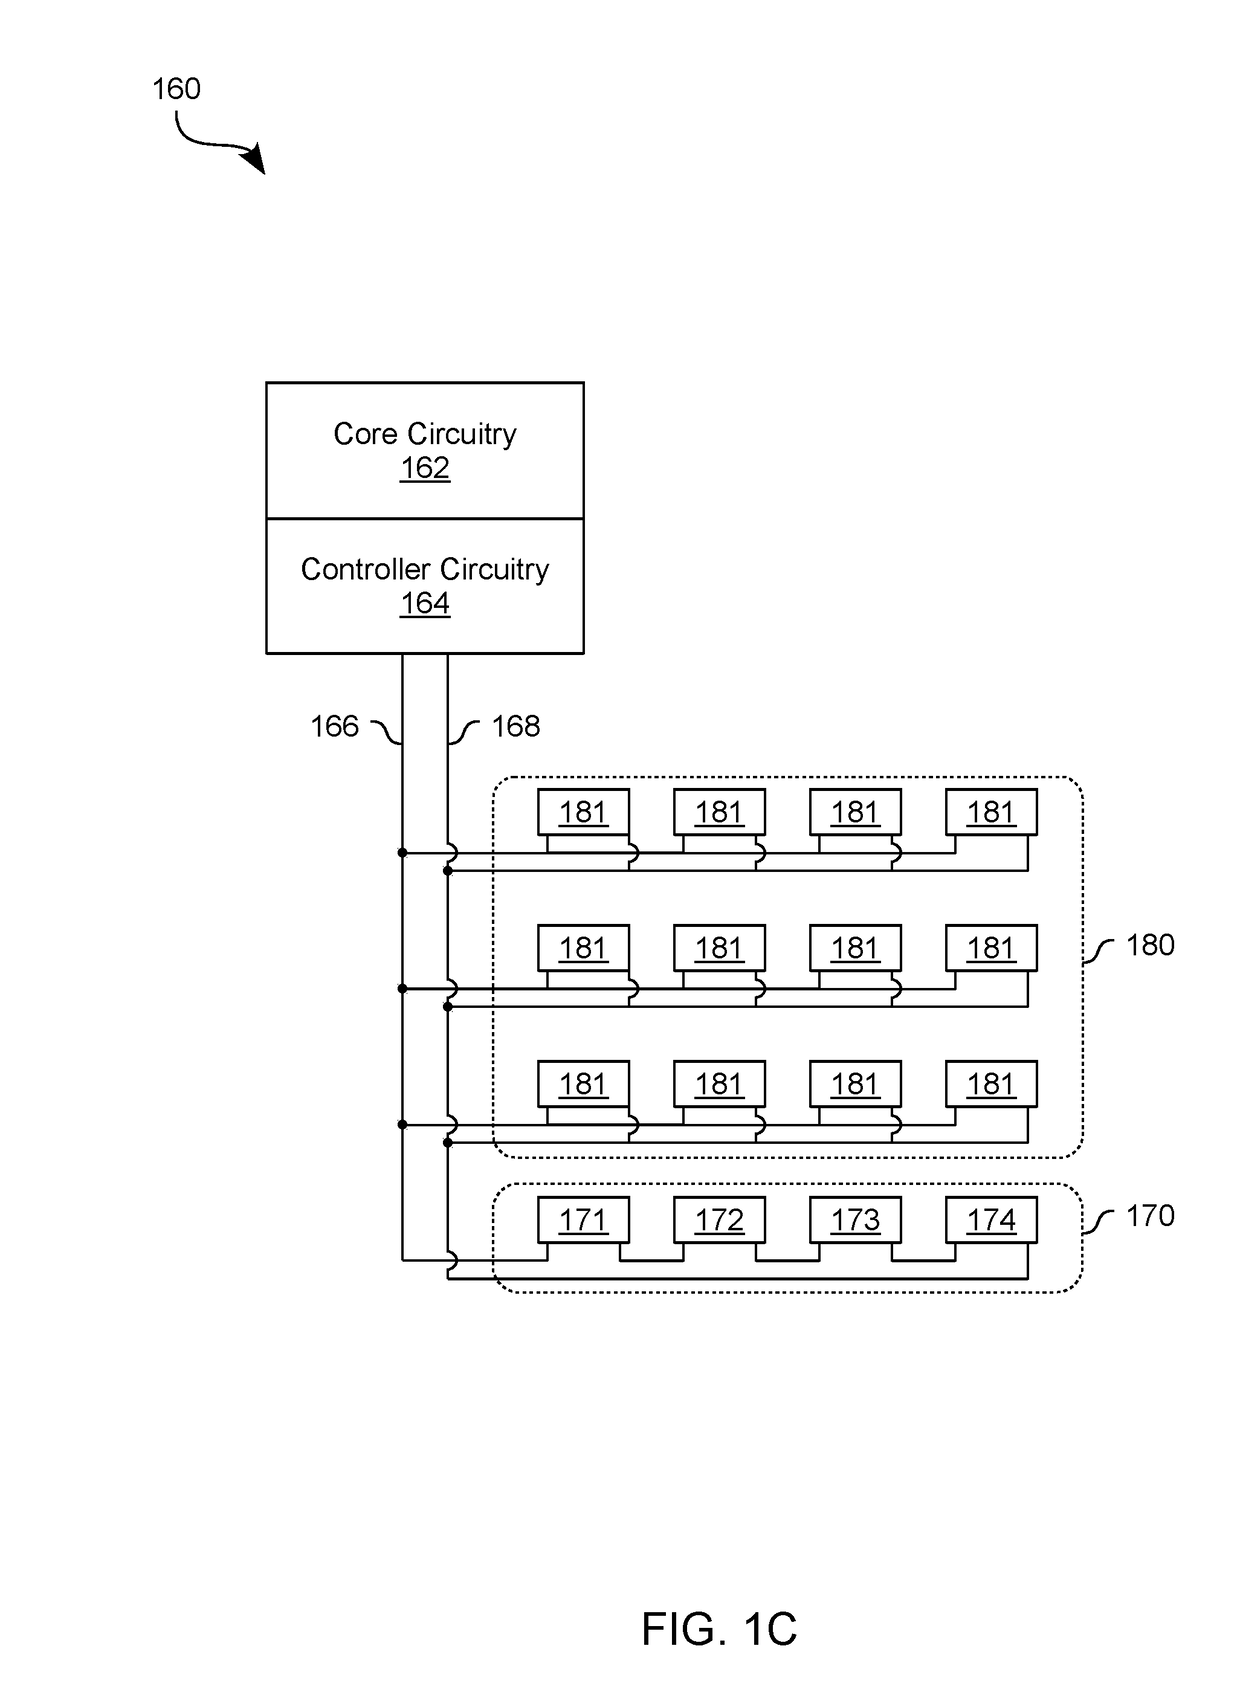 Pipeline circuit architecture to provide in-memory computation functionality